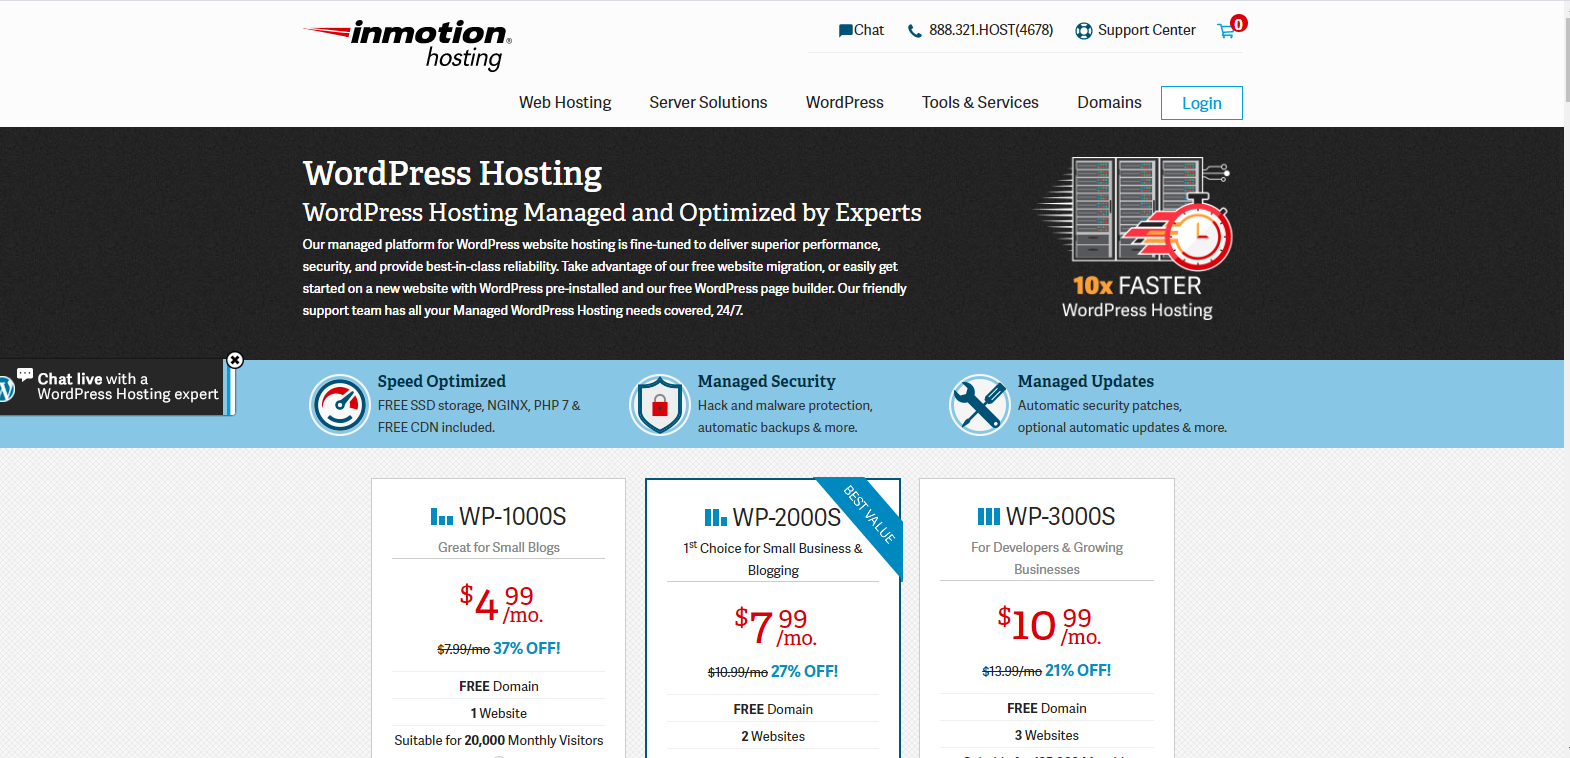 The Best 10 Web Hosting Providers For Your Small Business - Image 7